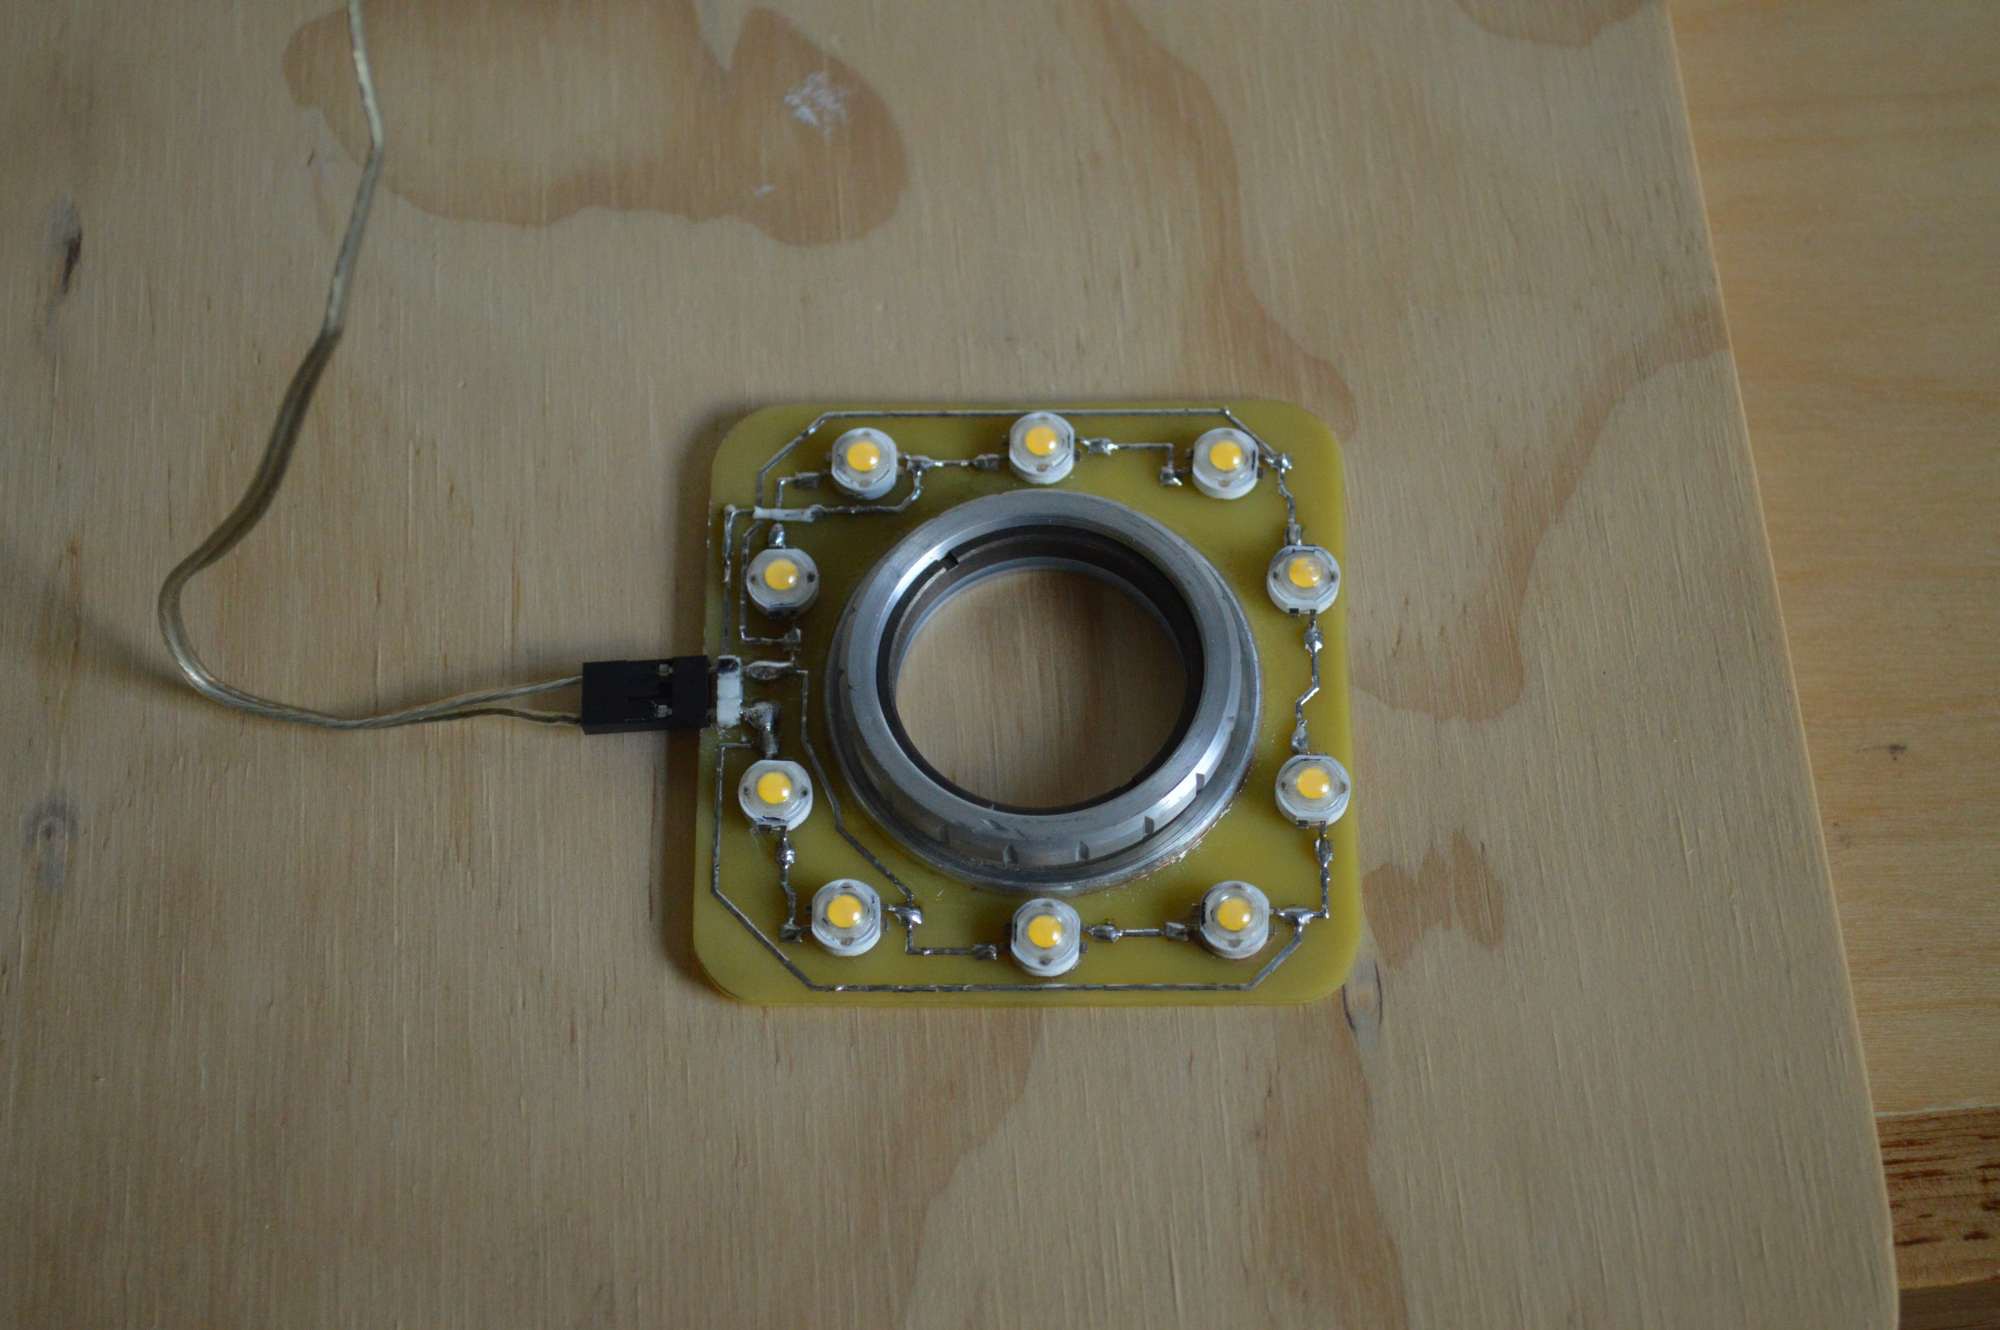 Build A Ring Light For Your Microscope